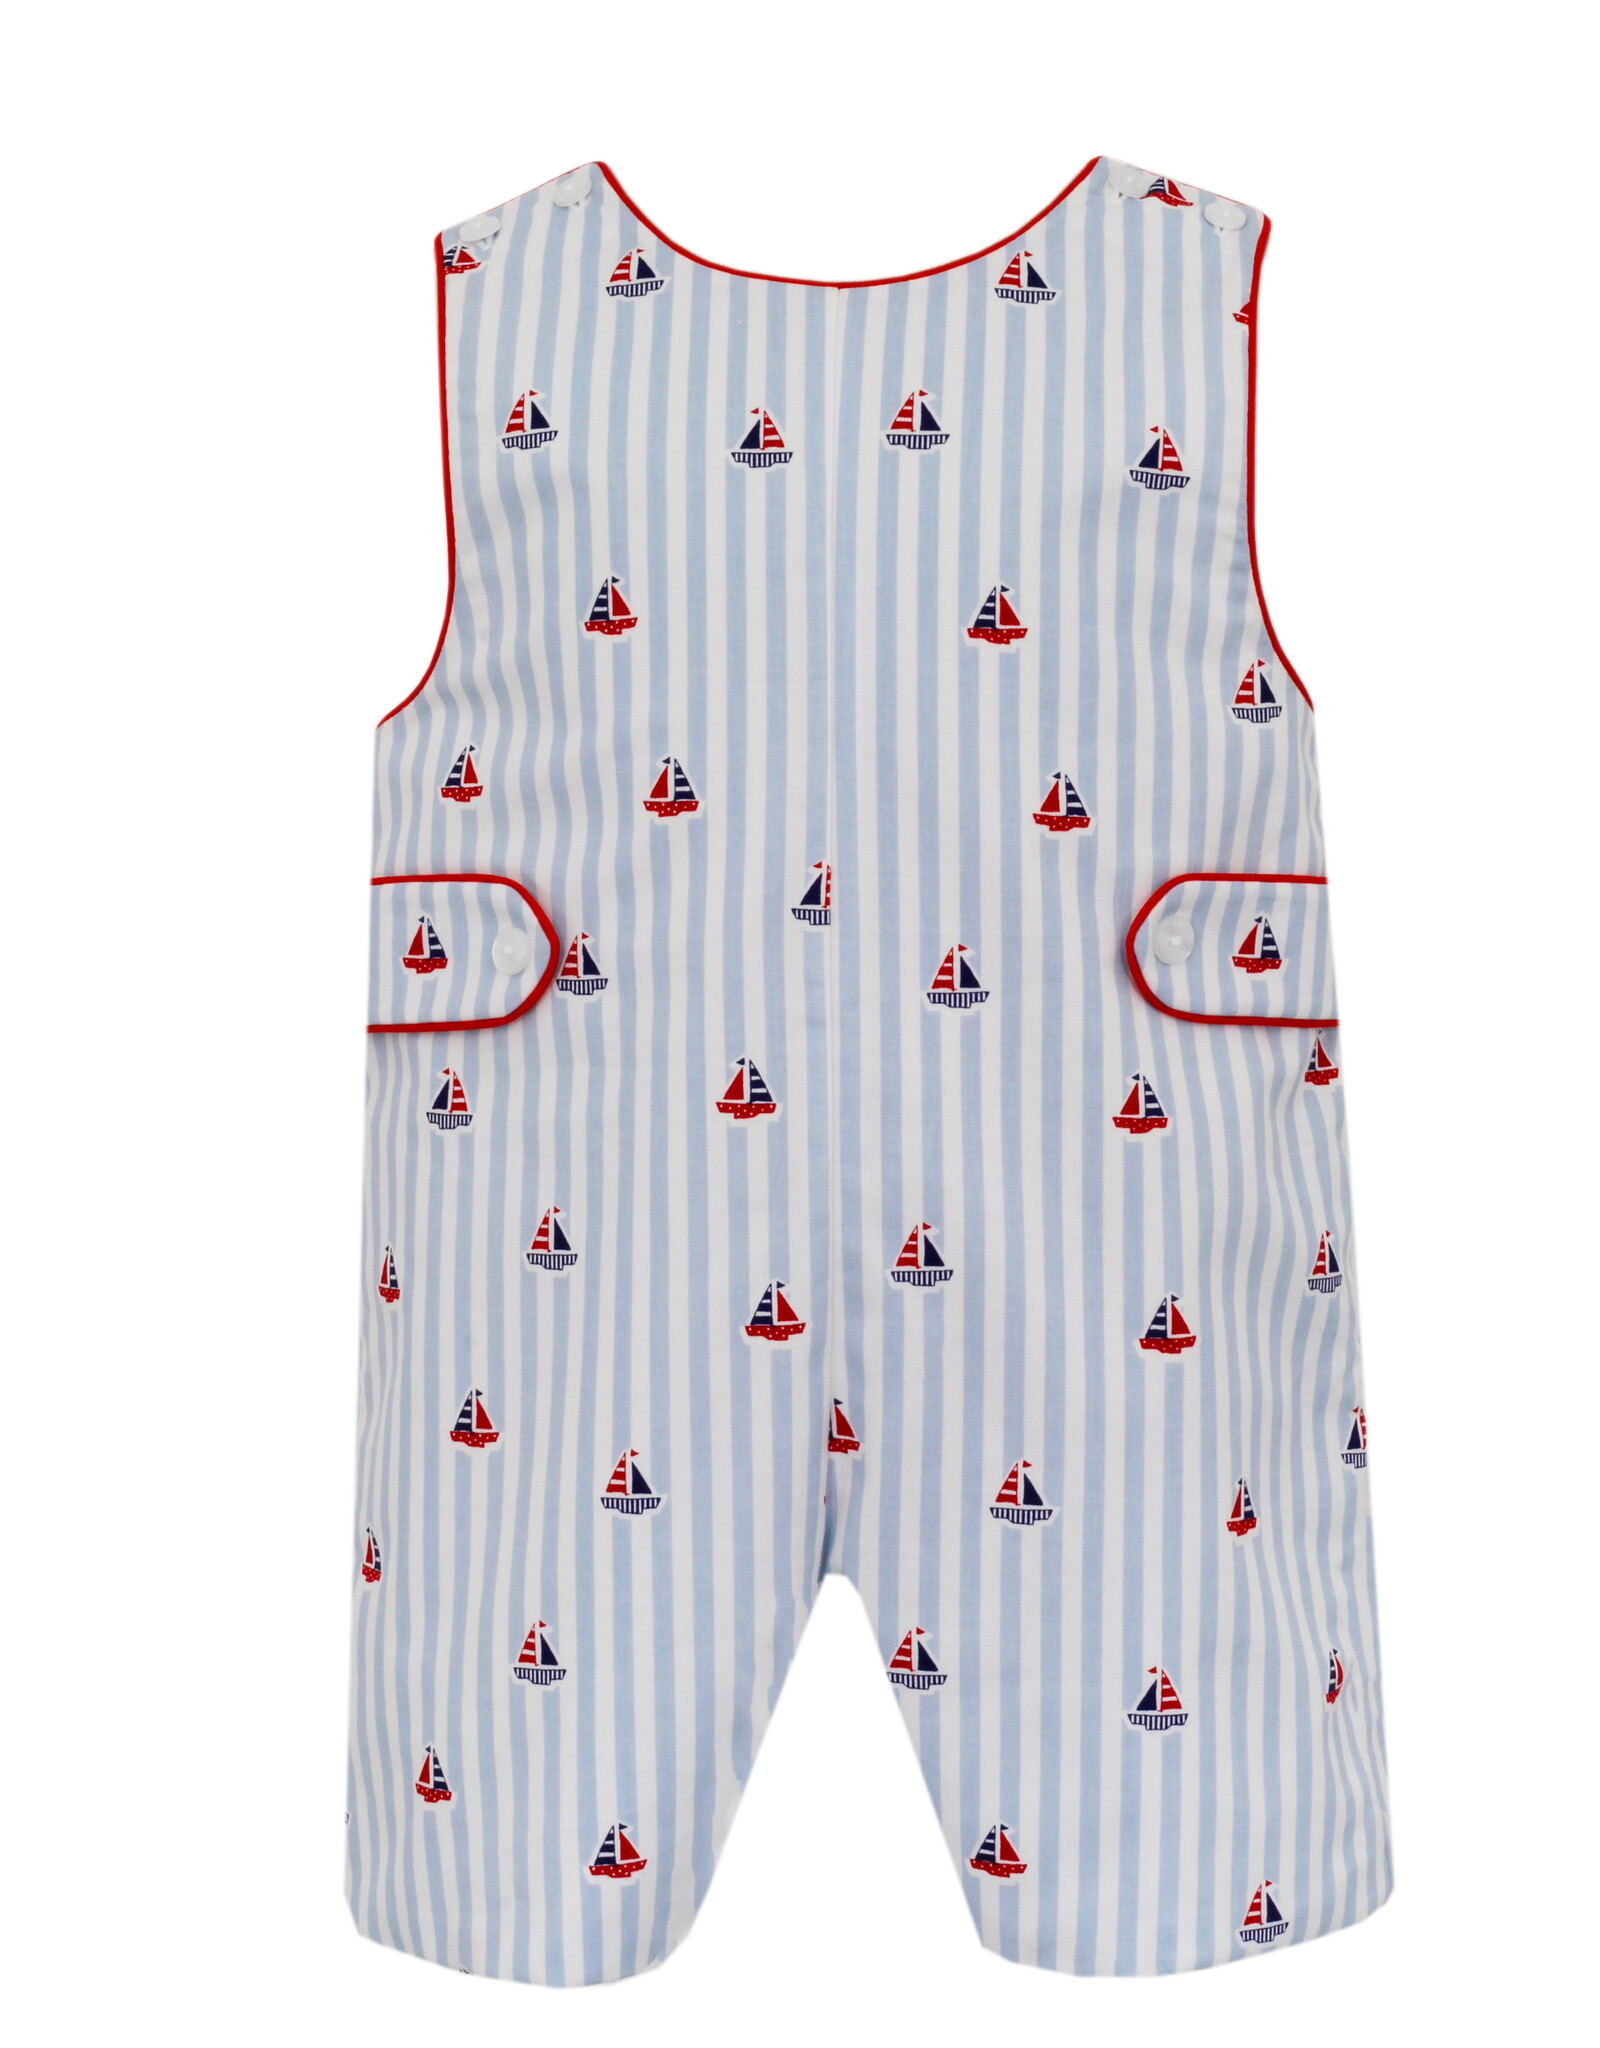 Claire and Charlie Blue/Red Sailboat Print Jon Jon